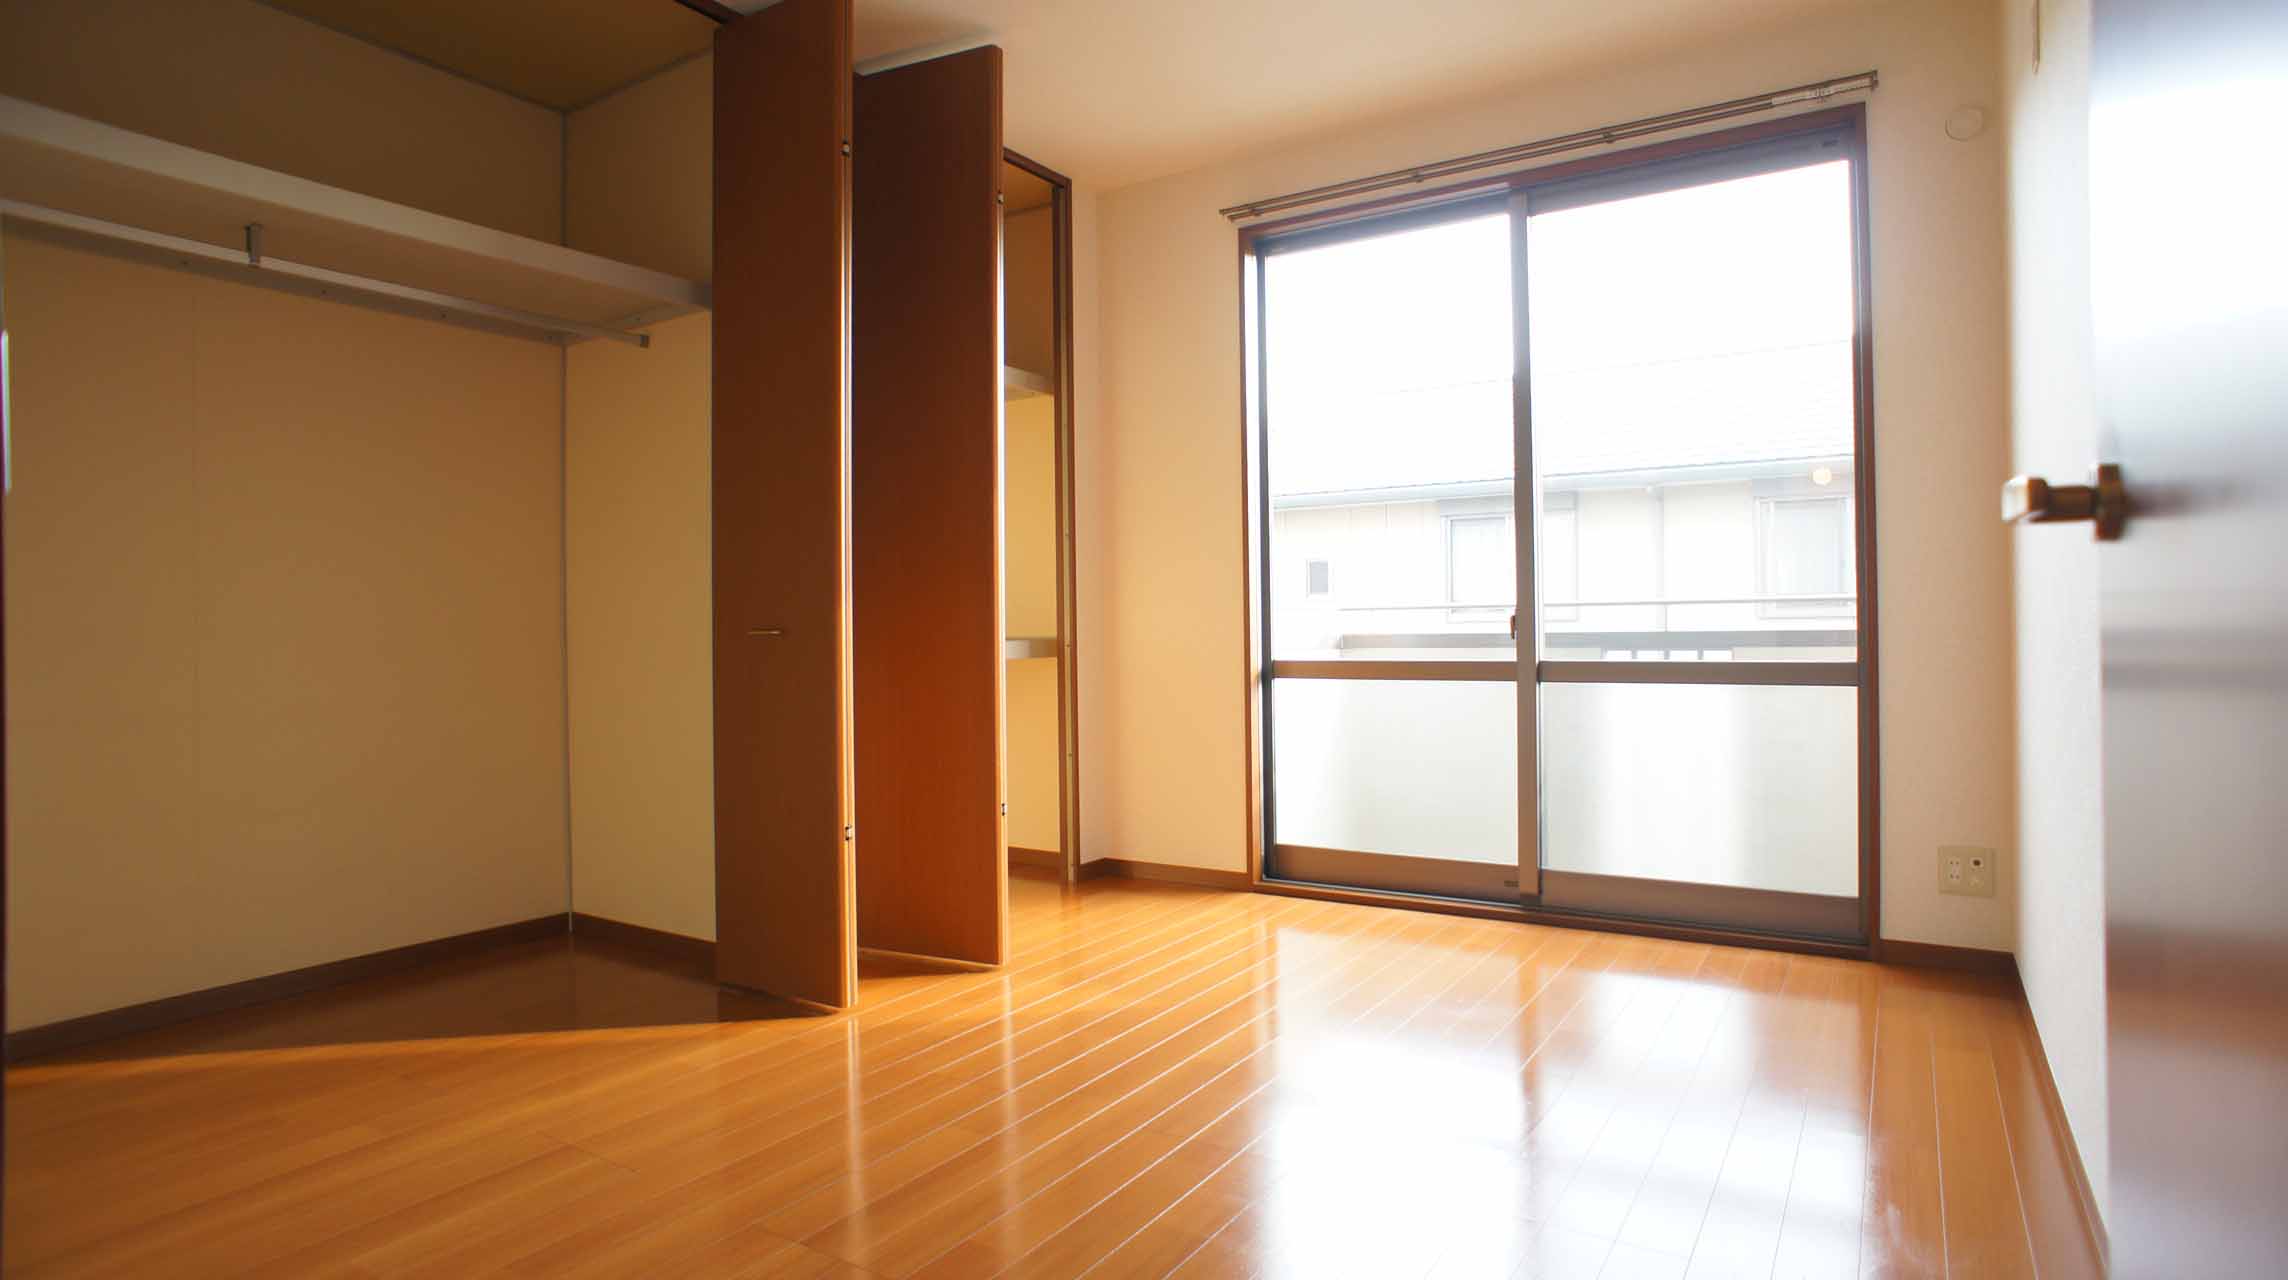 Living and room. South-facing 6 Pledge of Western-style Akinoko not calm grain interior of